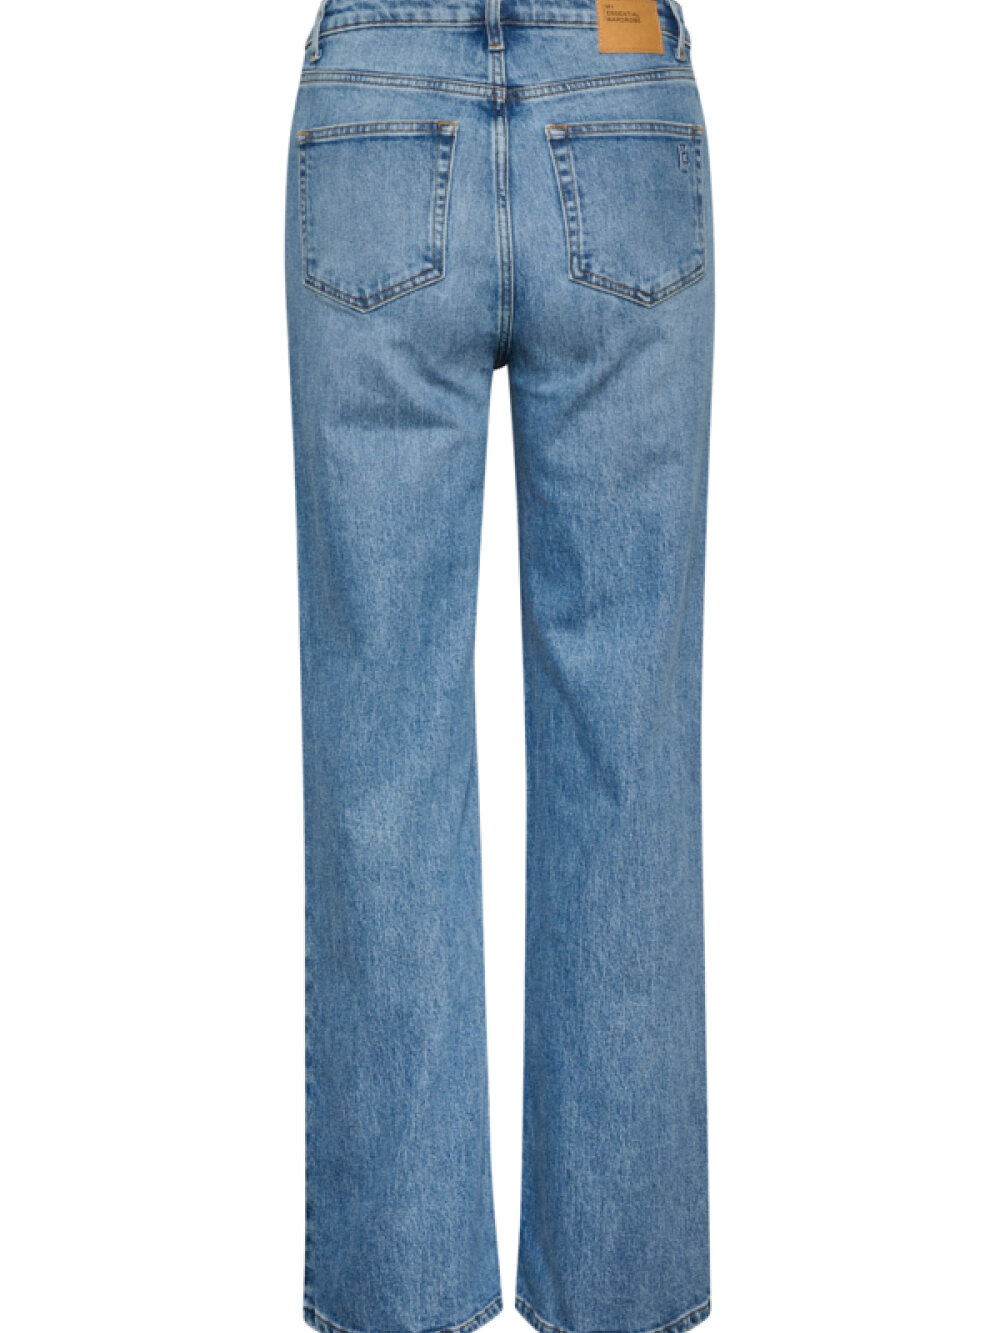 My Essential Wardrobe - 35 The Louis 139 High Wide Jeans